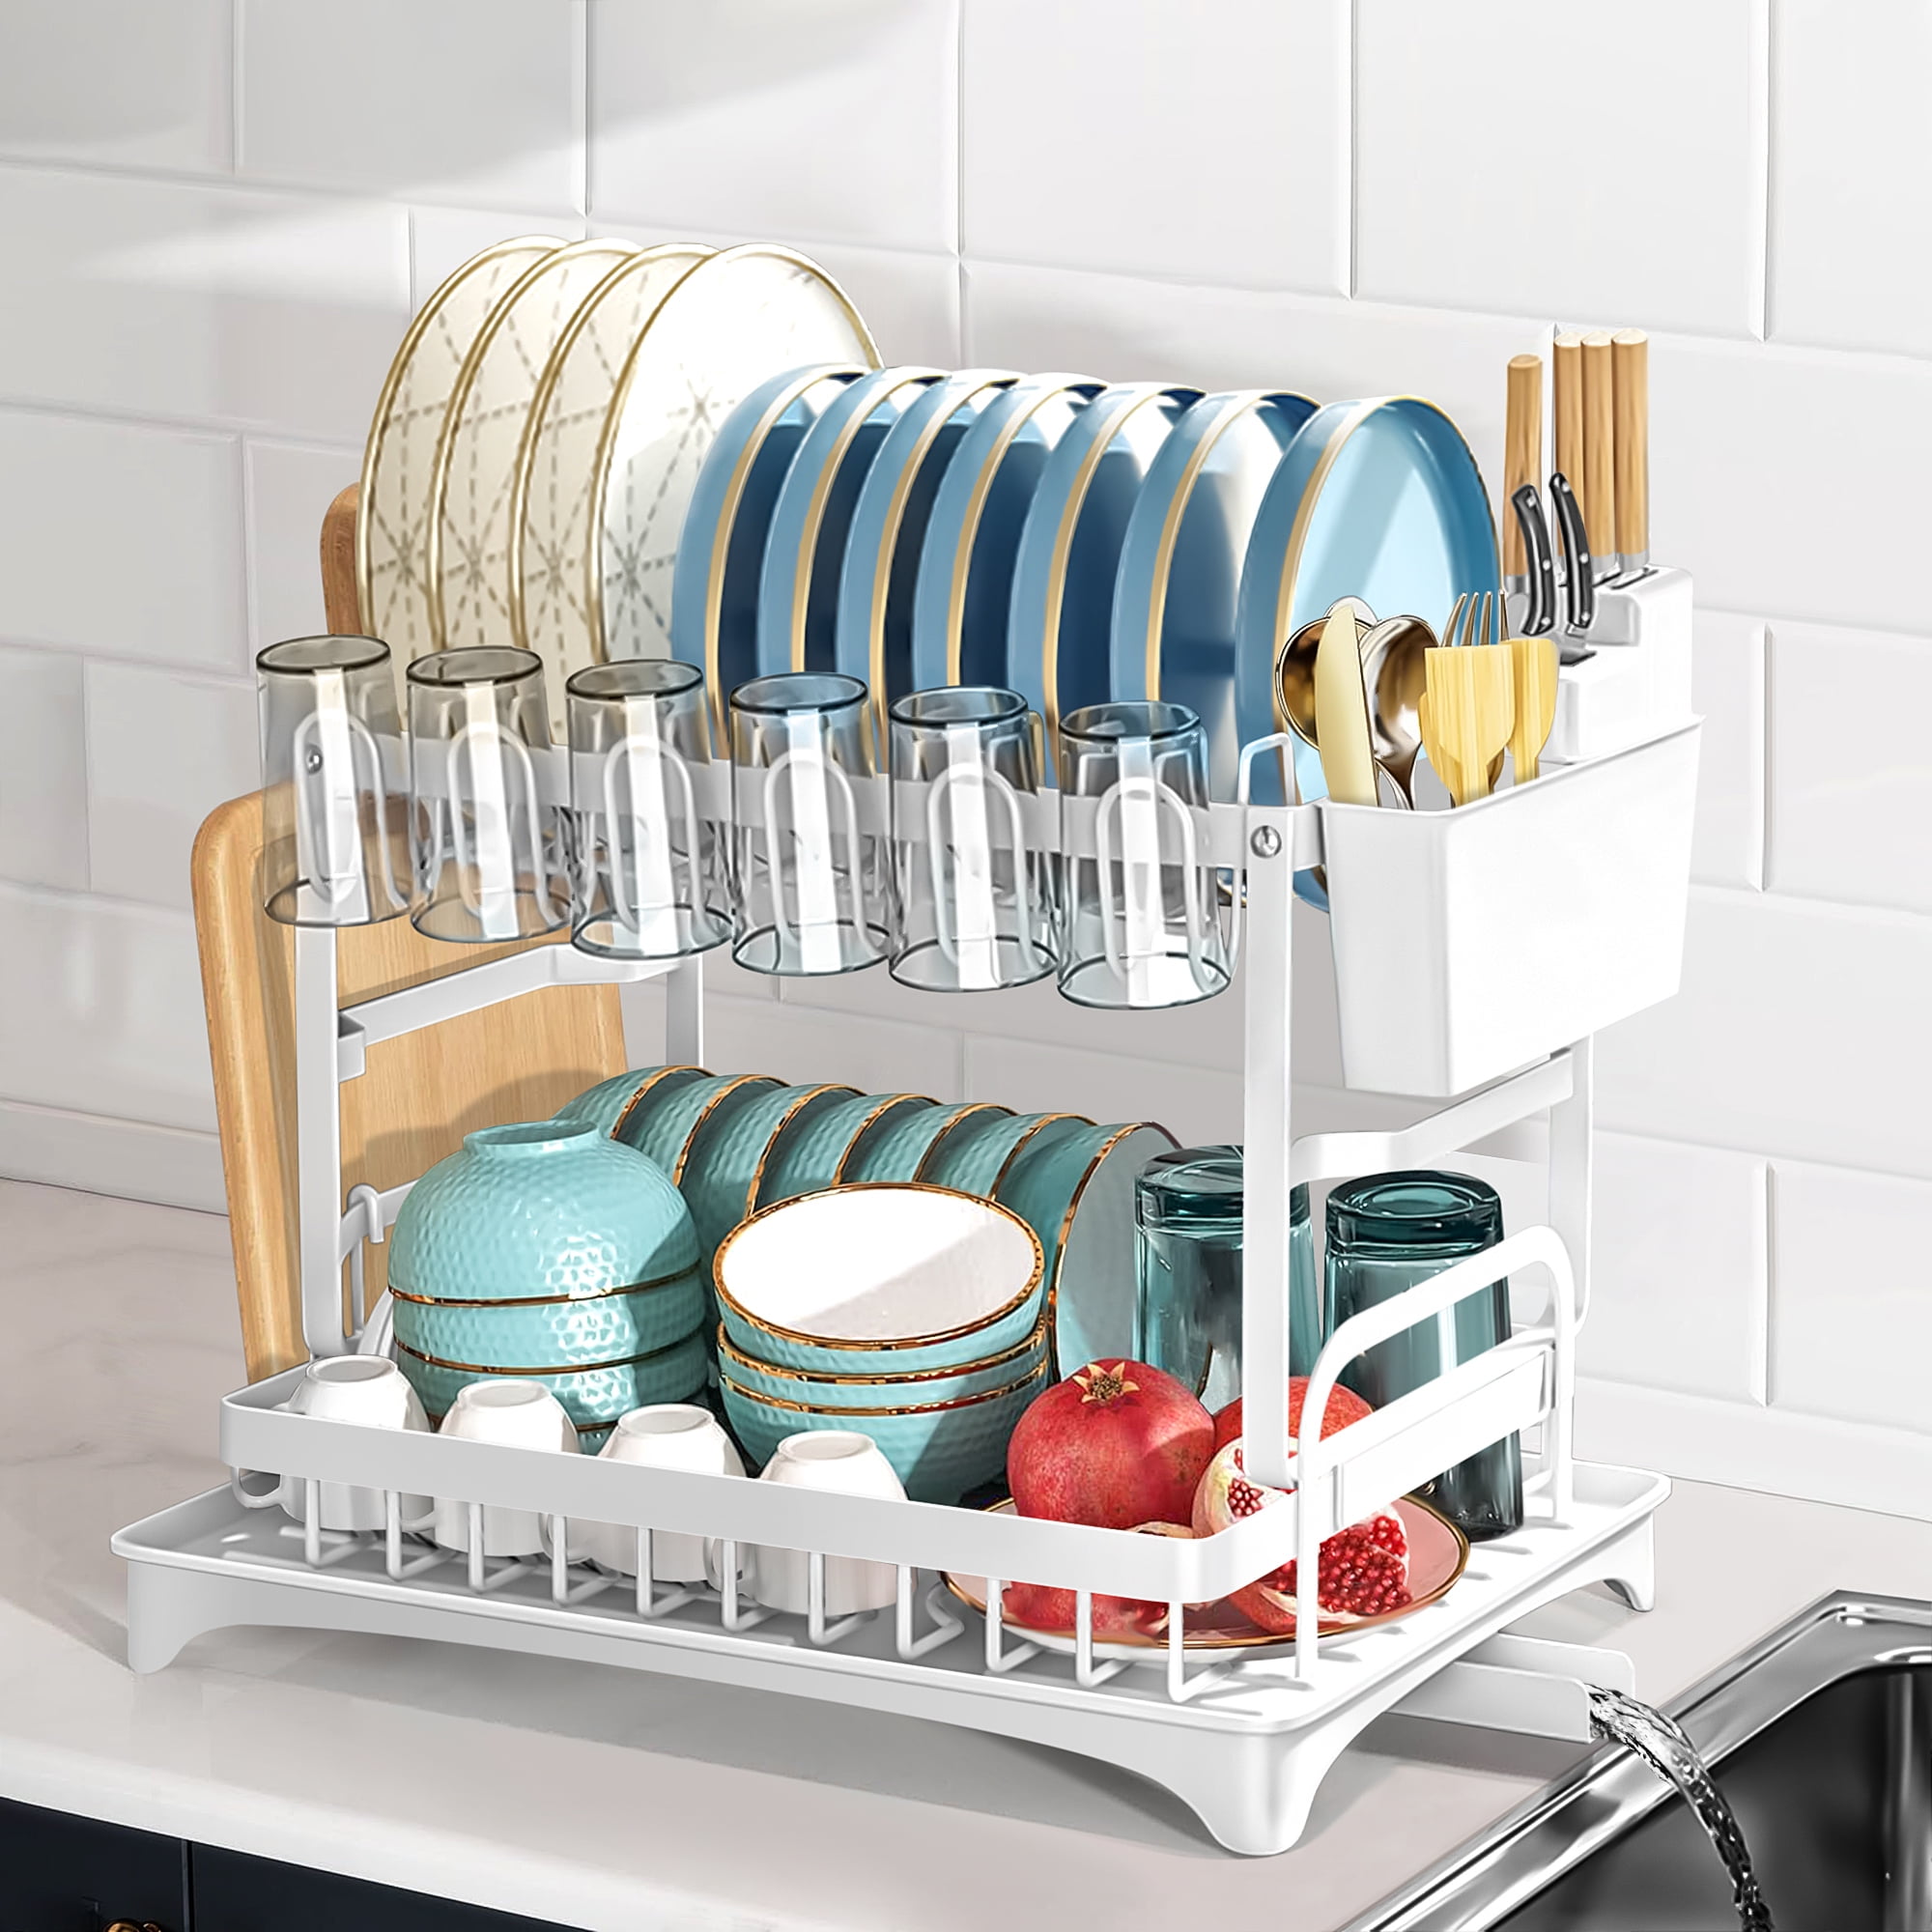 Riousery 2-Tier Dish Rack for Kitchen, Dish Drying Rack with Drain Board  Tray, Compact Dishing Rack with Utensil Holder, Cutting Board Holder,  Kitchen Dishes Storage and Organizers 